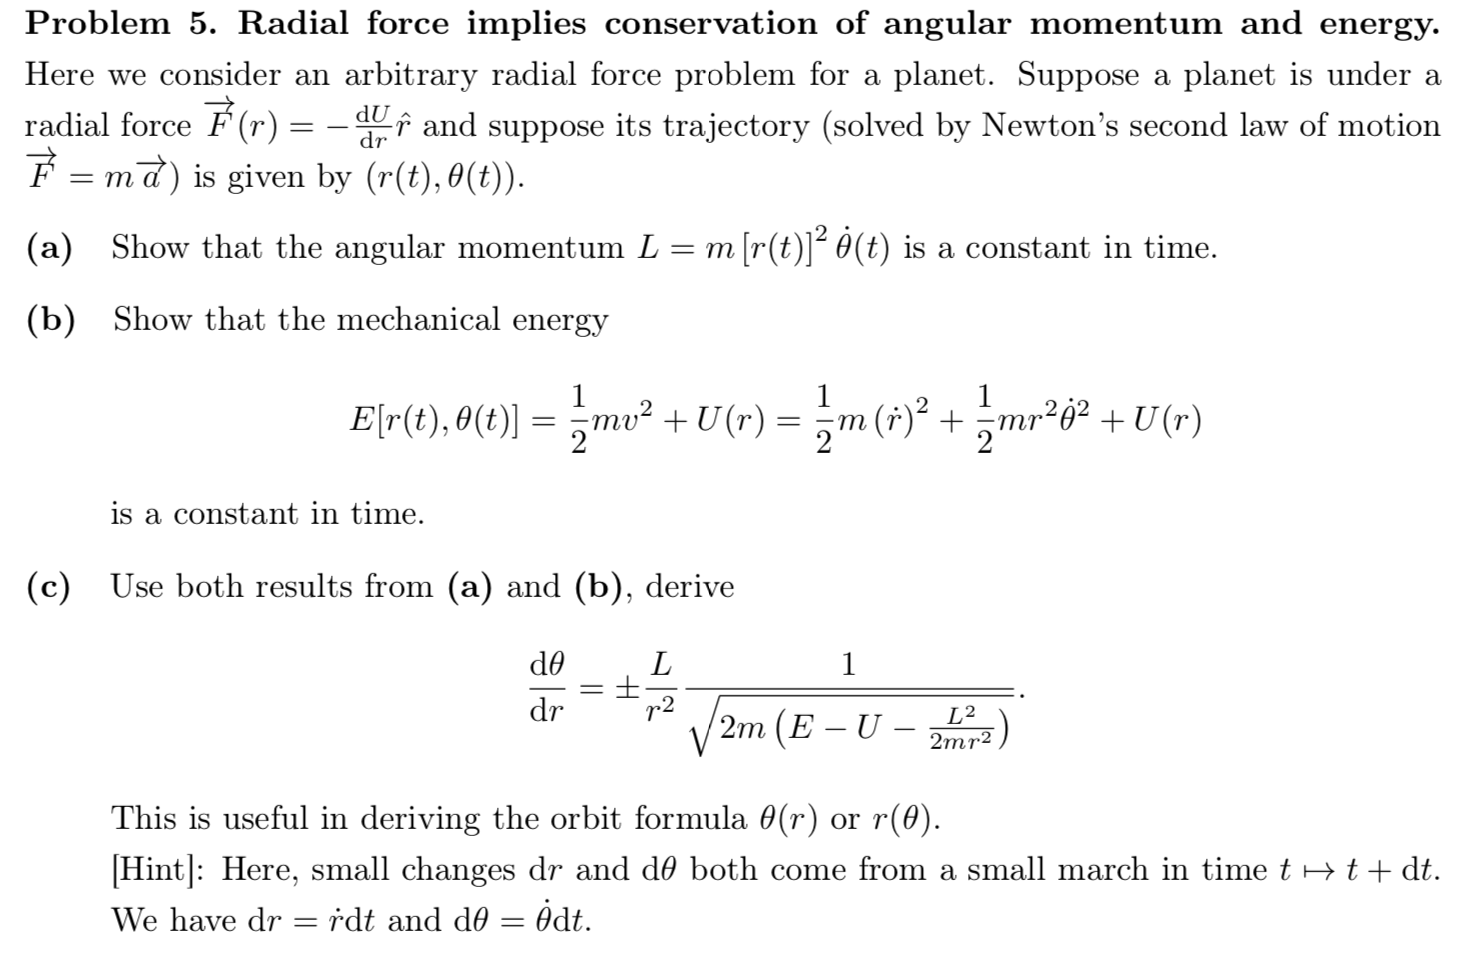 law of conservation of angular momentum